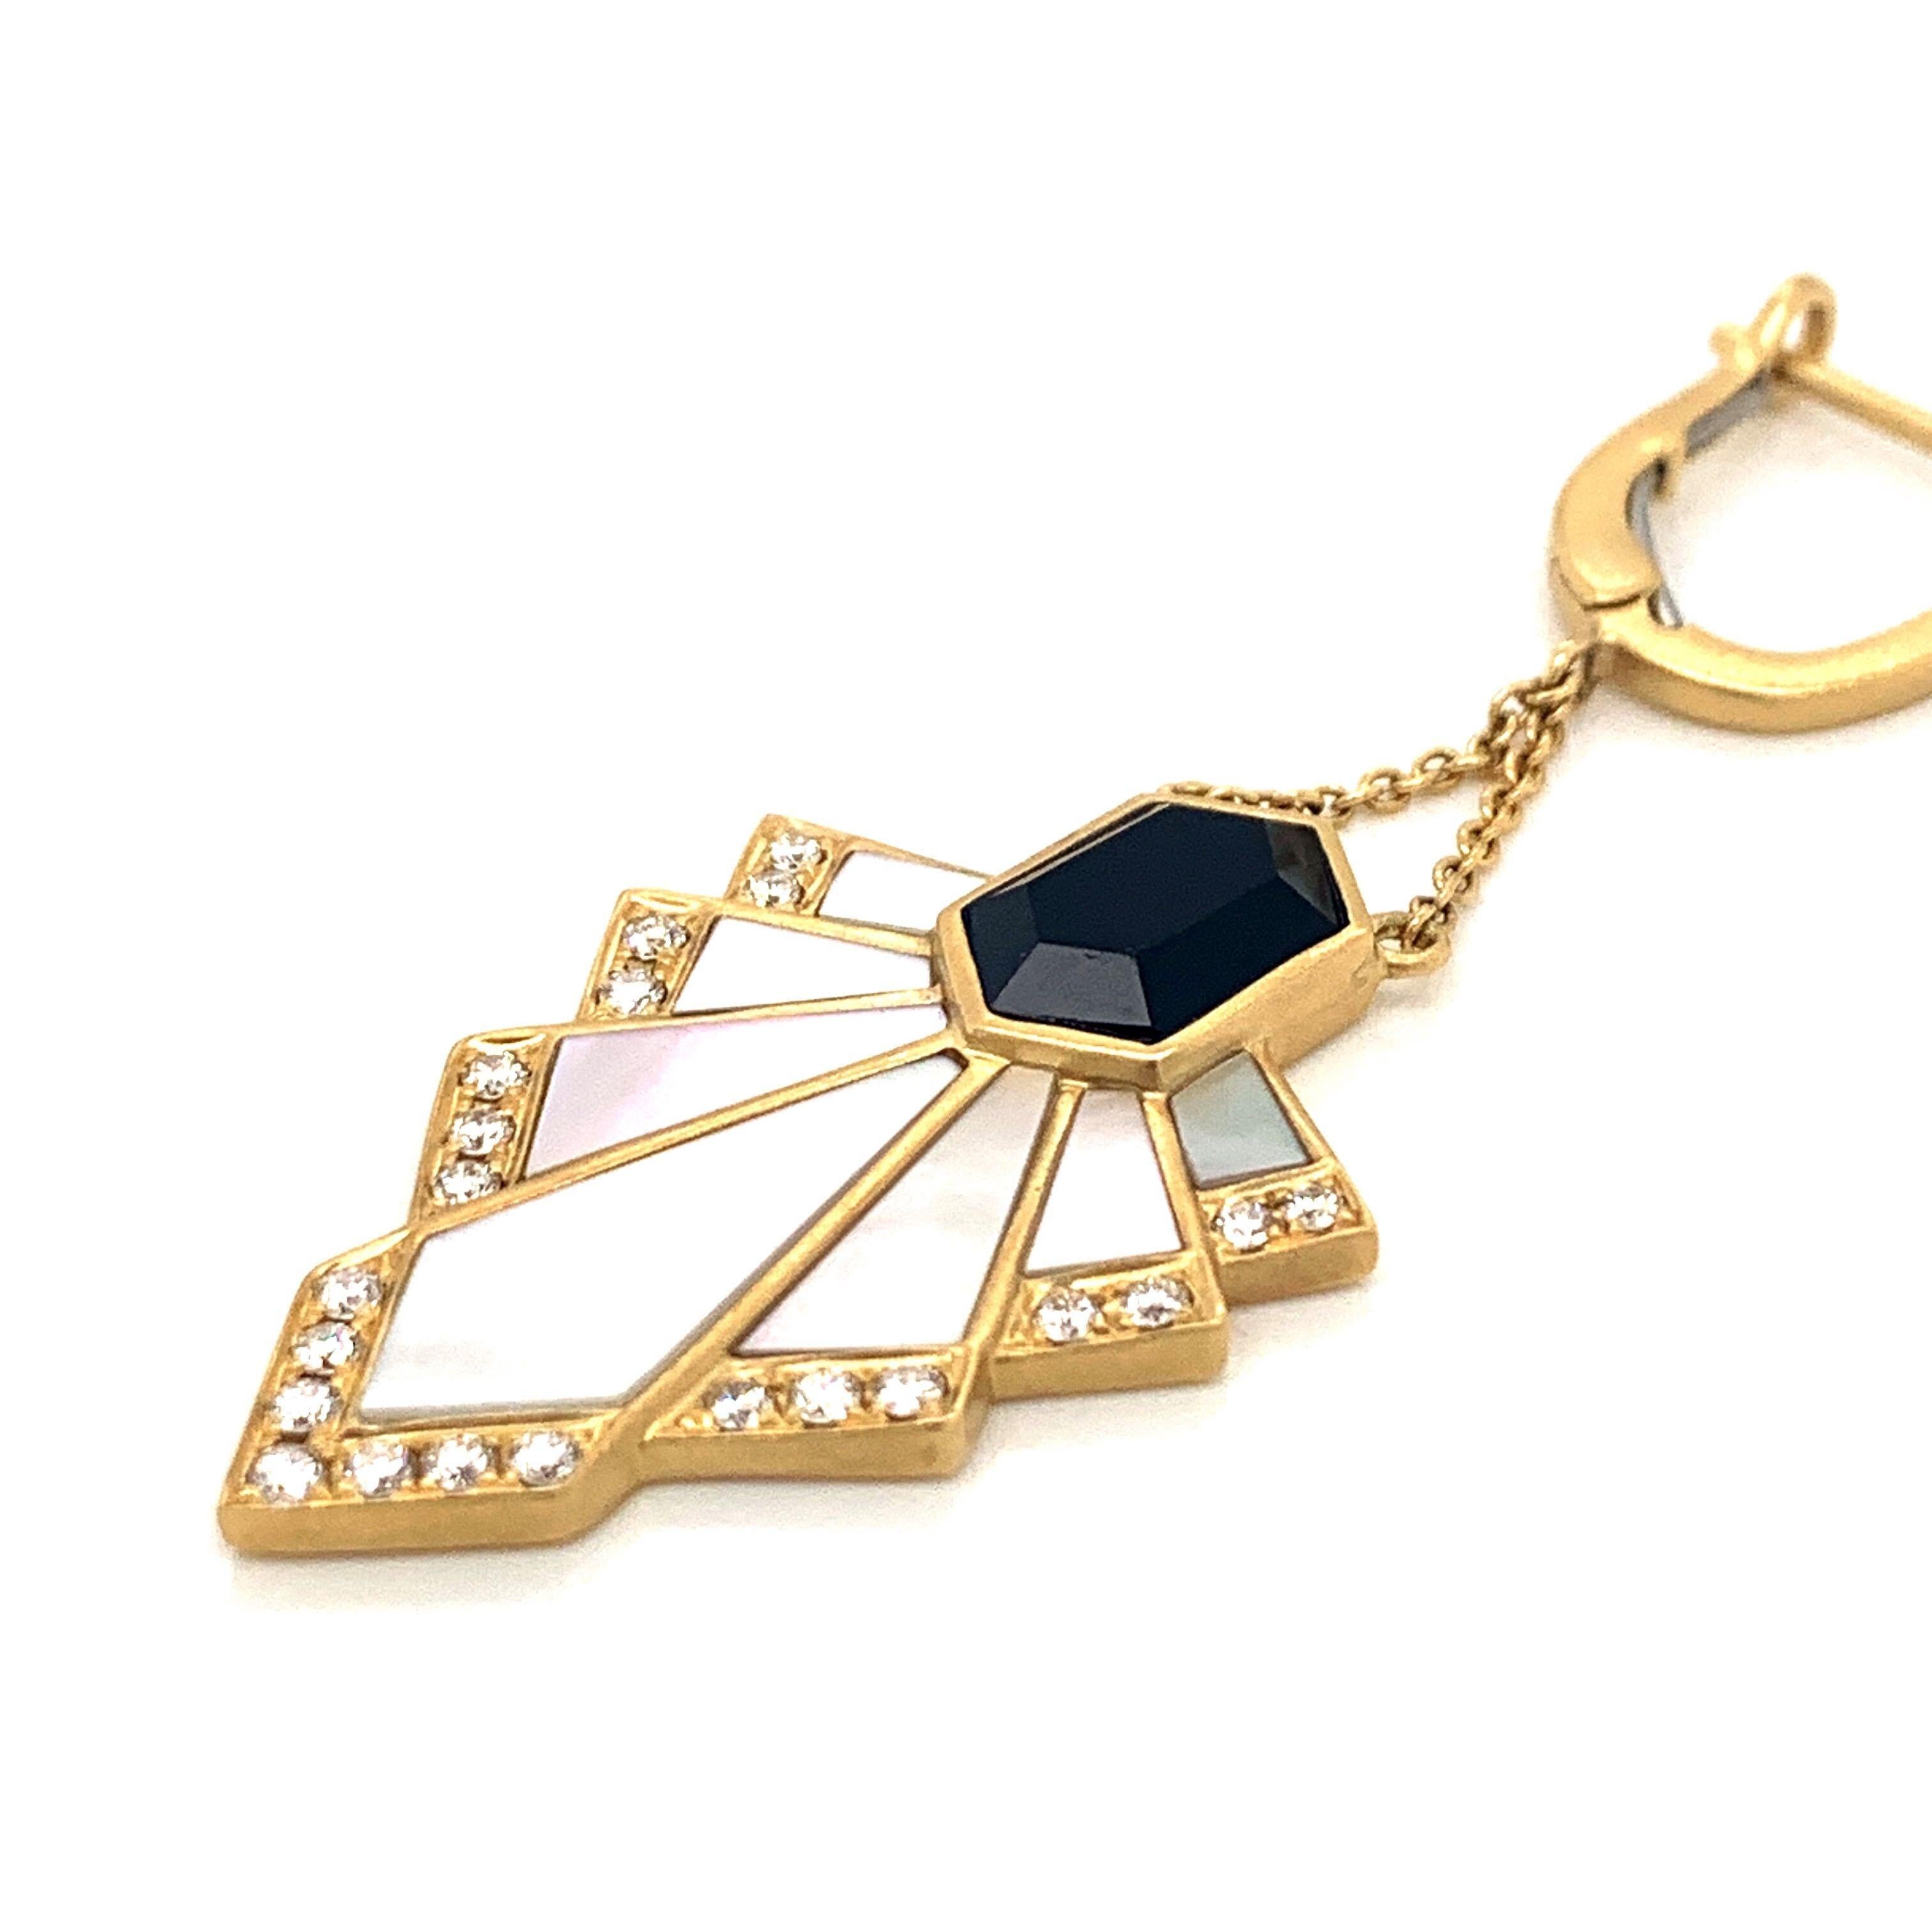 Art Deco style Earrings featuring Mother of Pearl inlay, Black Onyx, and diamonds, set in 18K Matte Finish Yellow Gold. Earrings hang from gold huggie tops, attached to chains. The Gatsby collection from Doves by Doron Paloma features exquisite